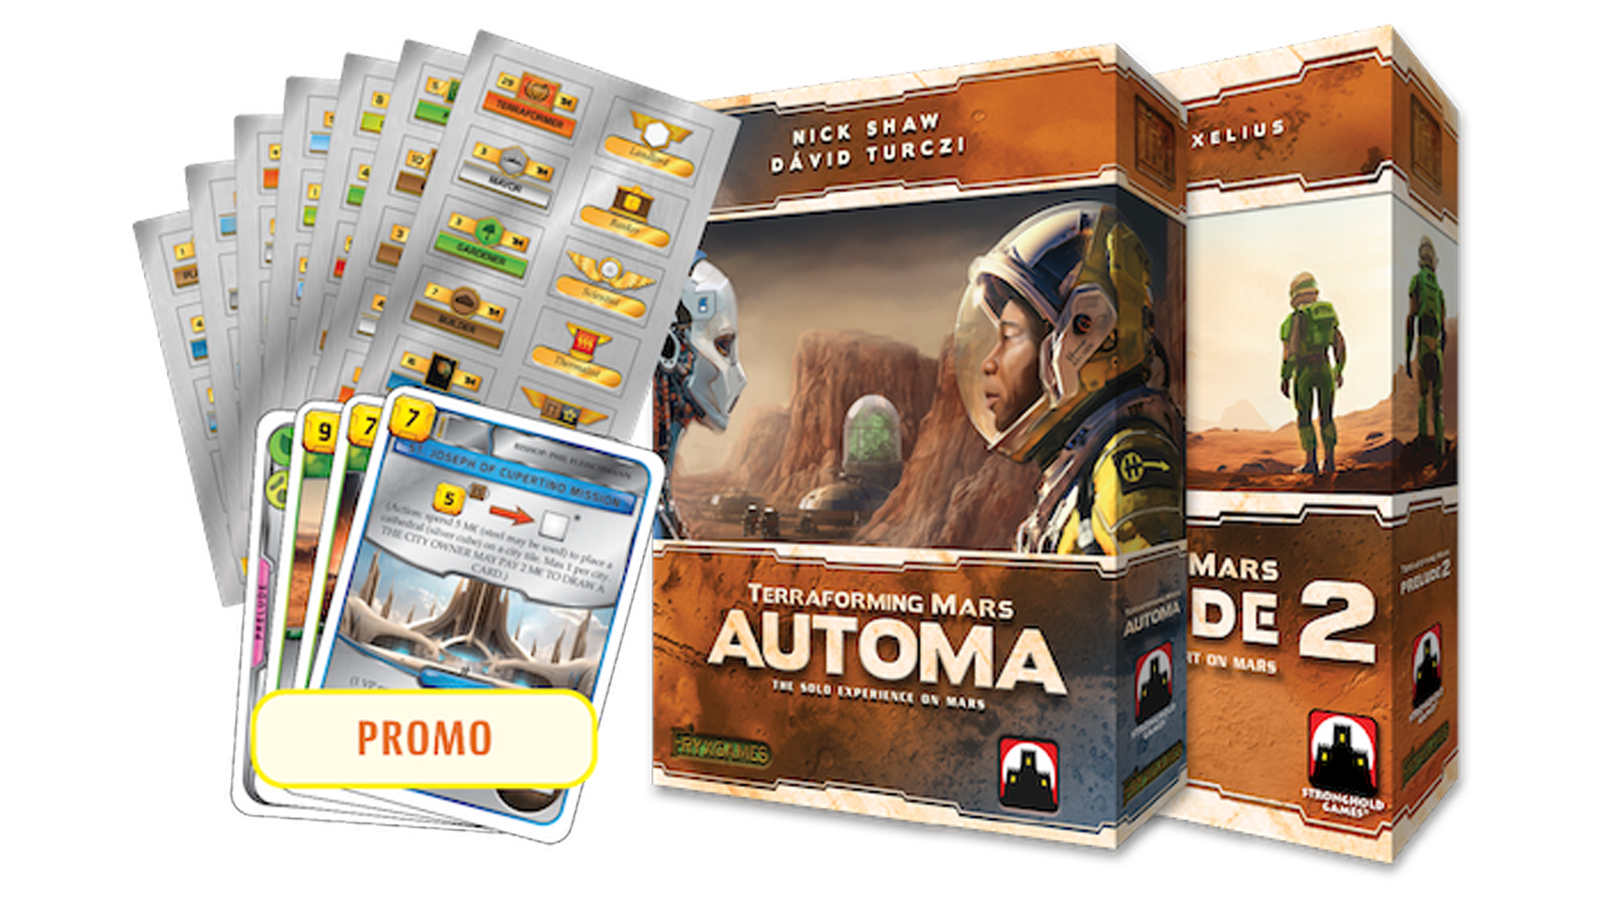 https://assetsio.reedpopcdn.com/terraforming-mars-automa-prelude-2-layout-image.png?width=1600&height=900&fit=crop&quality=100&format=png&enable=upscale&auto=webp